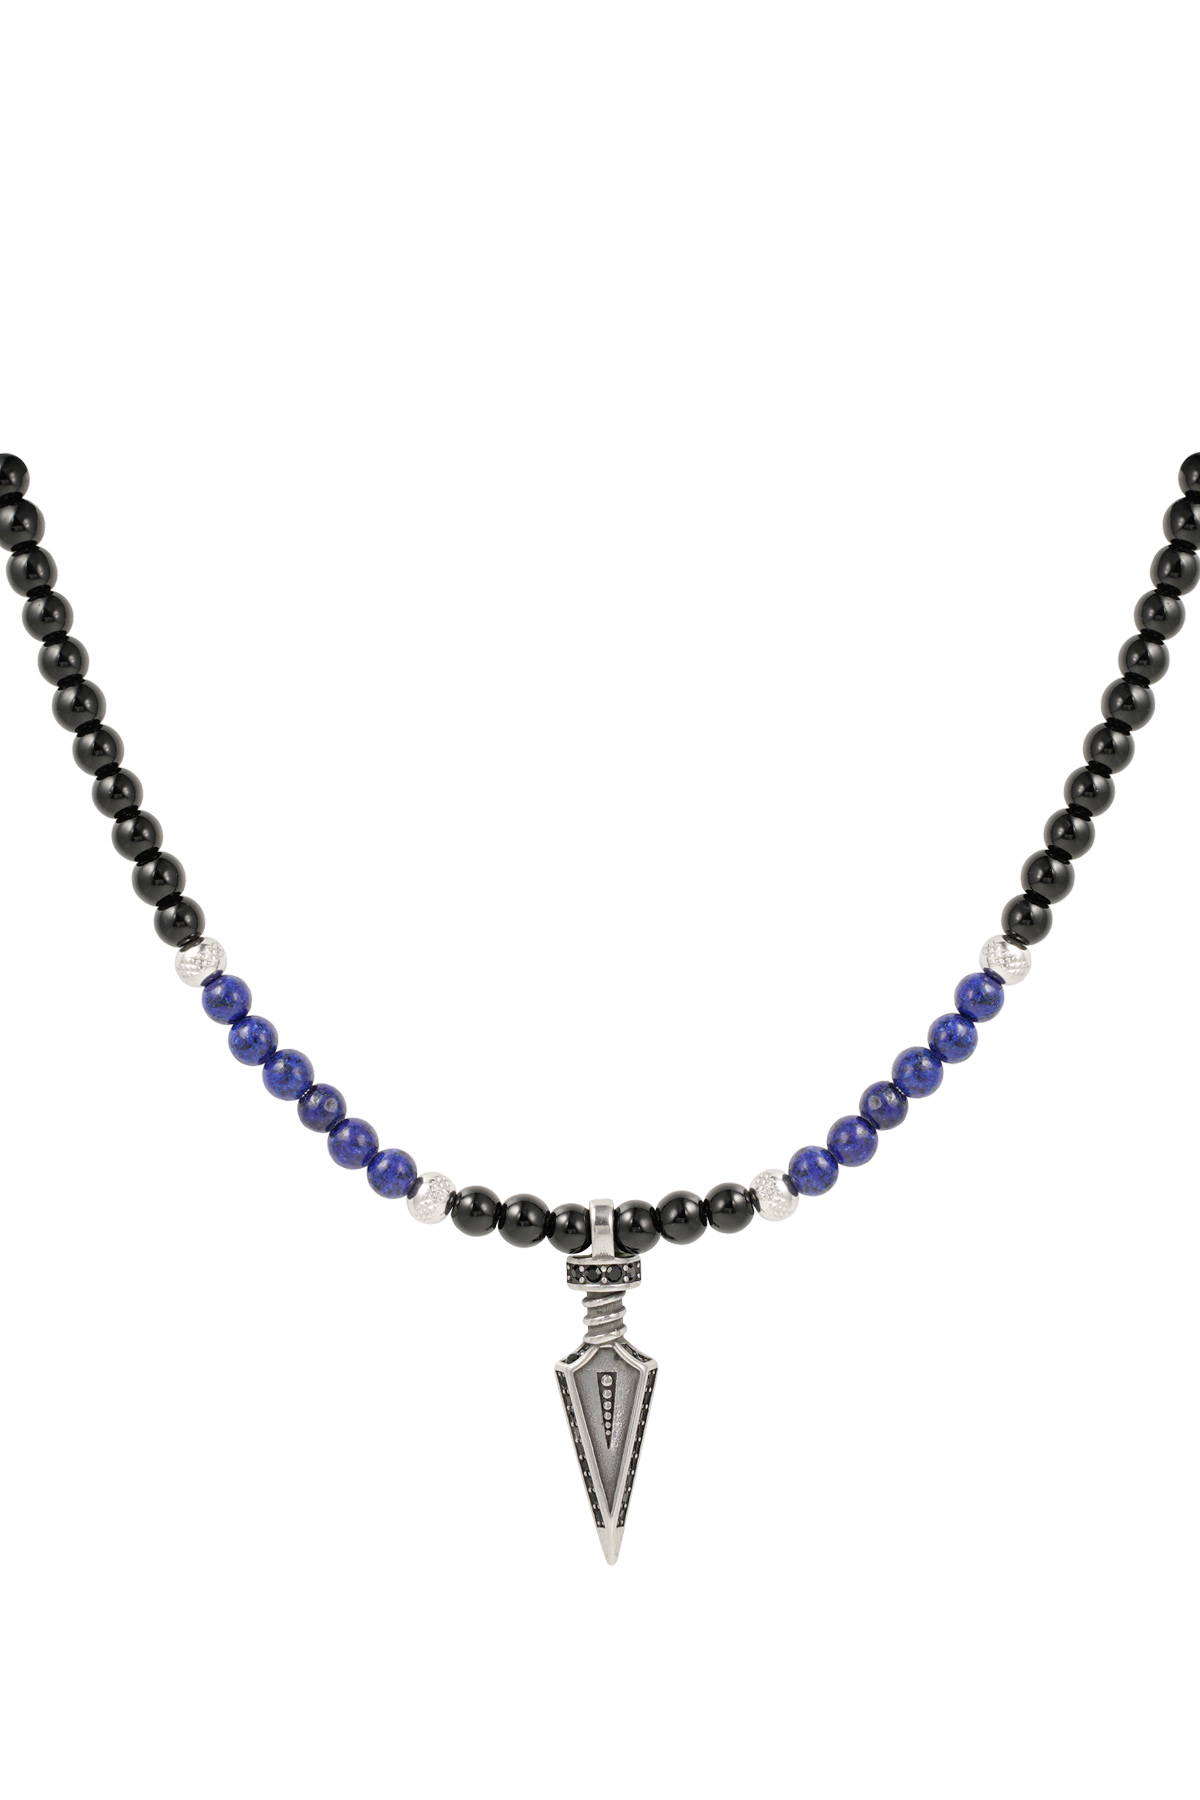 Men's necklace beads with charm - blue 